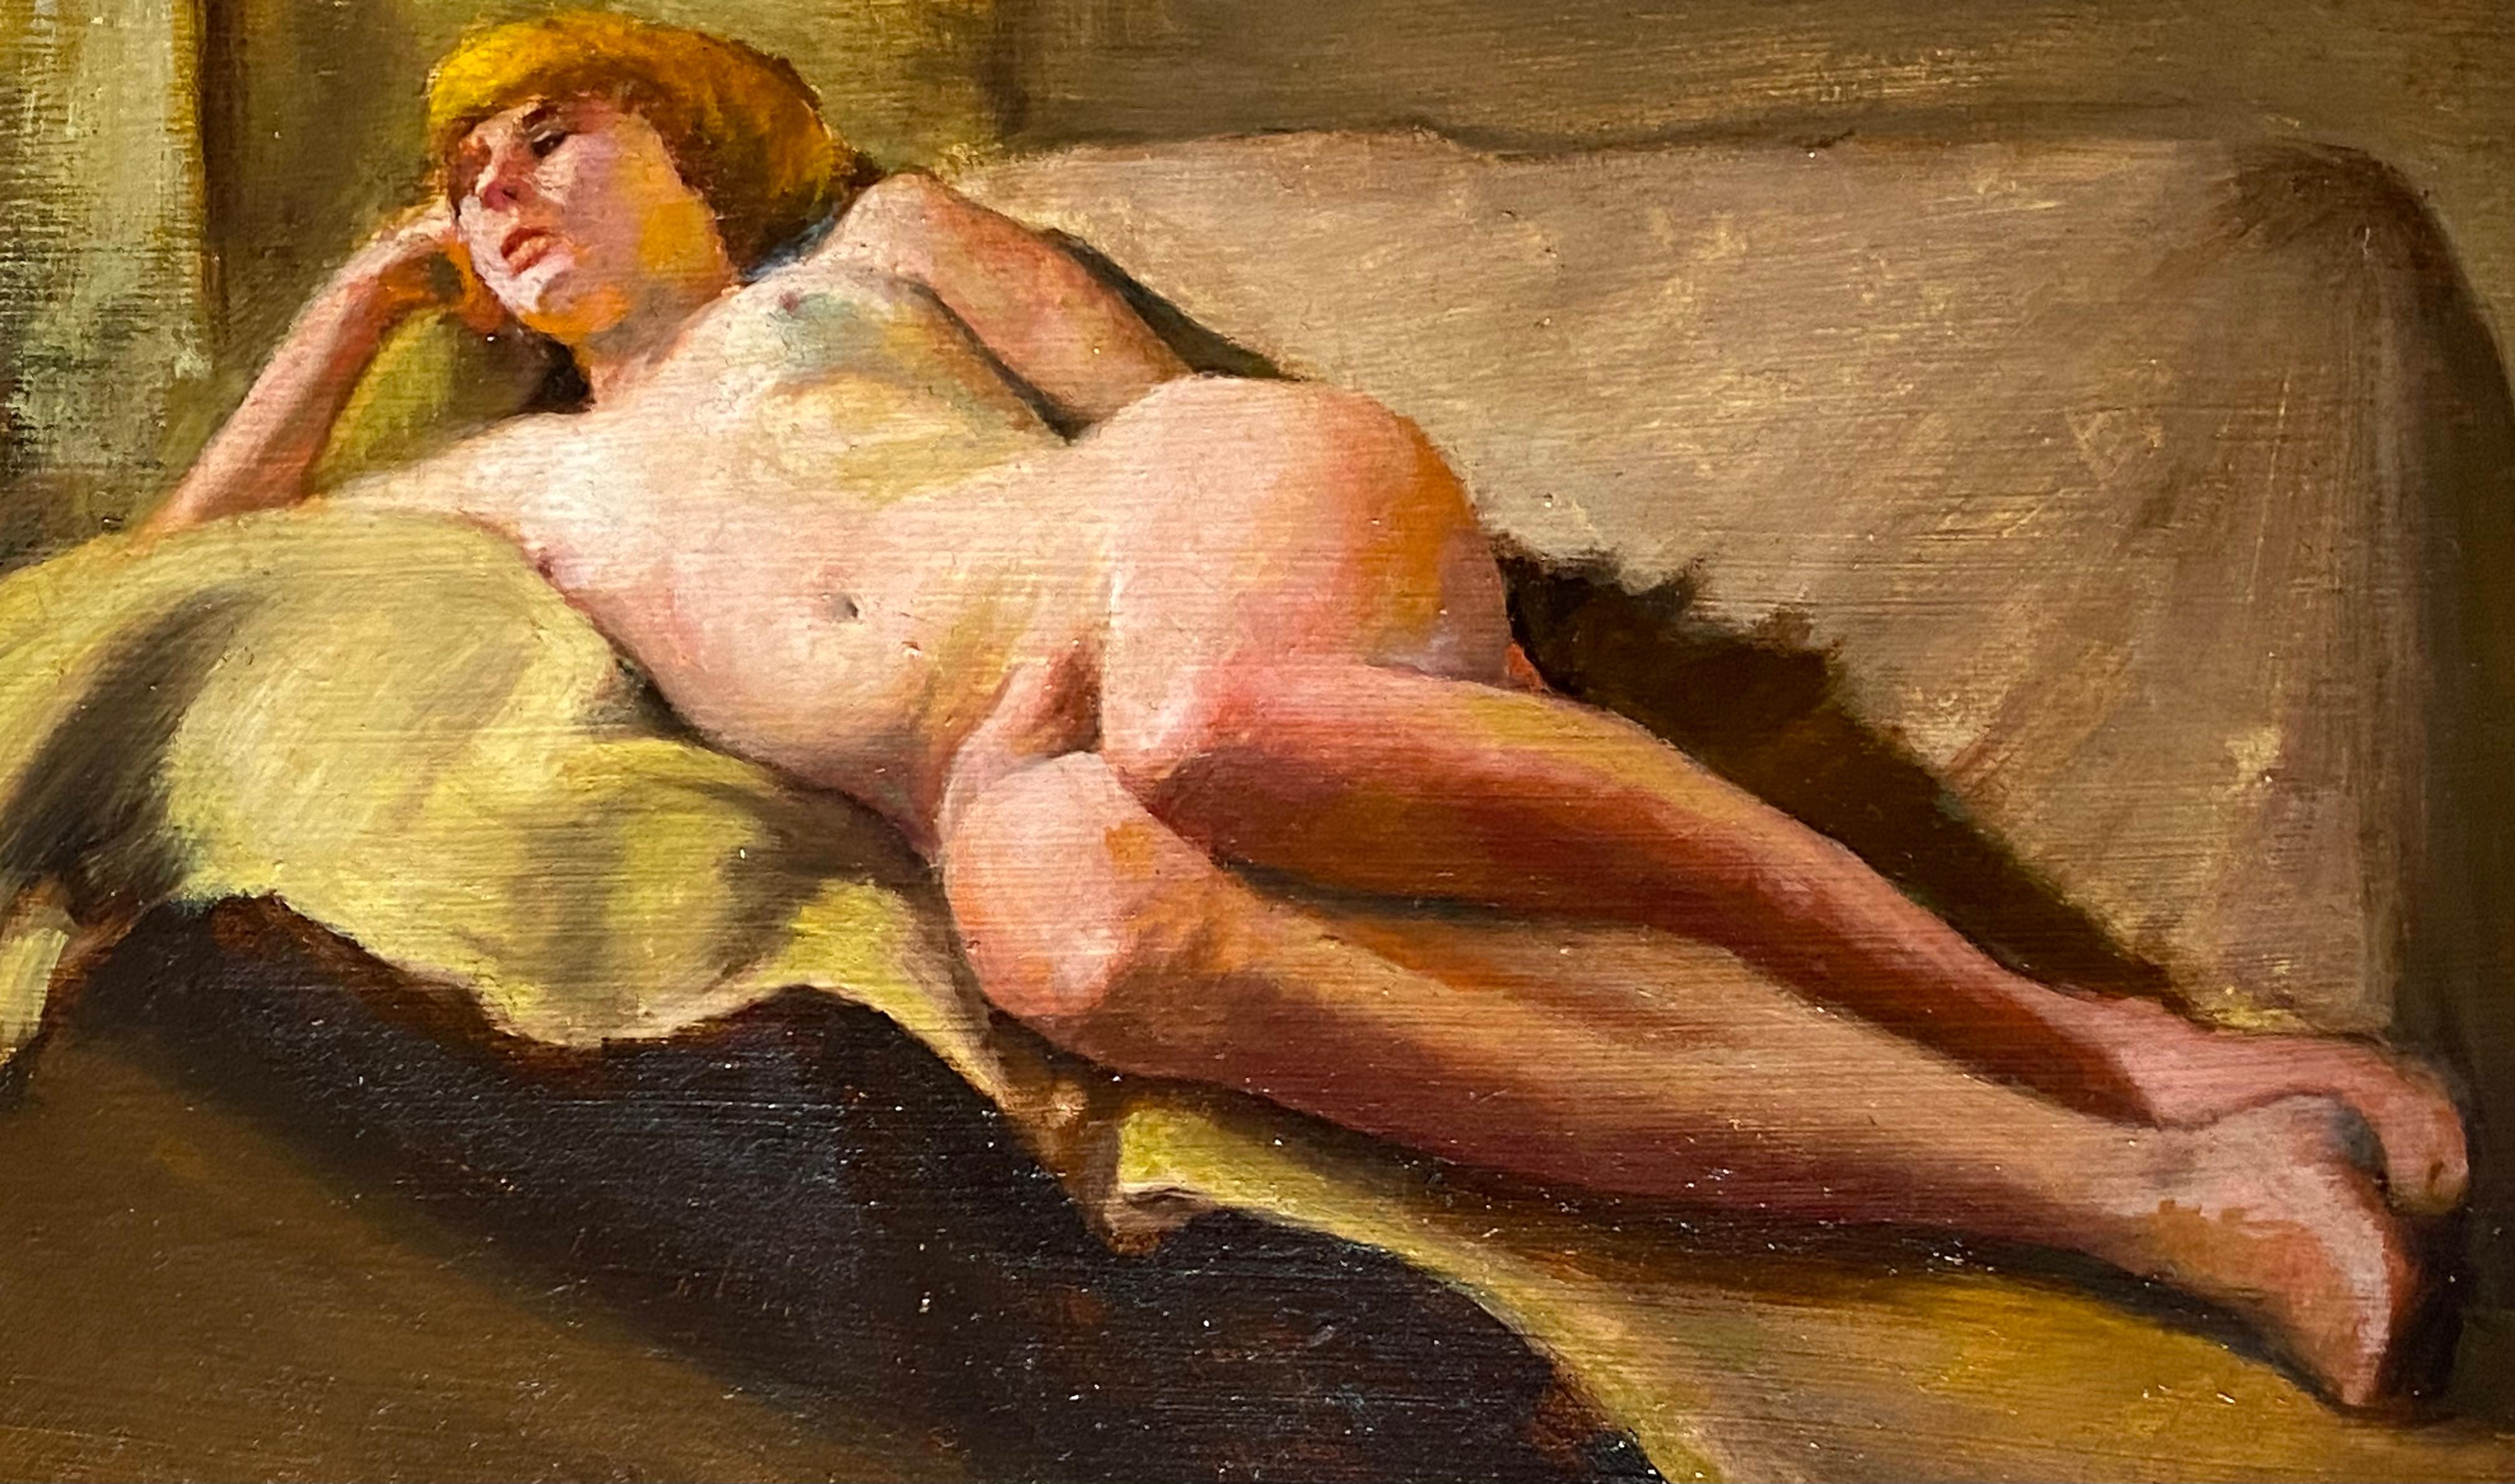 
Very well executed oil on masonite painting of a reclining female nude by the New York artist, Richard Clive. Signed lower left by the artist. Circa 1965.  Condition is very good. The painting is housed in its original ornate gold leaf with white